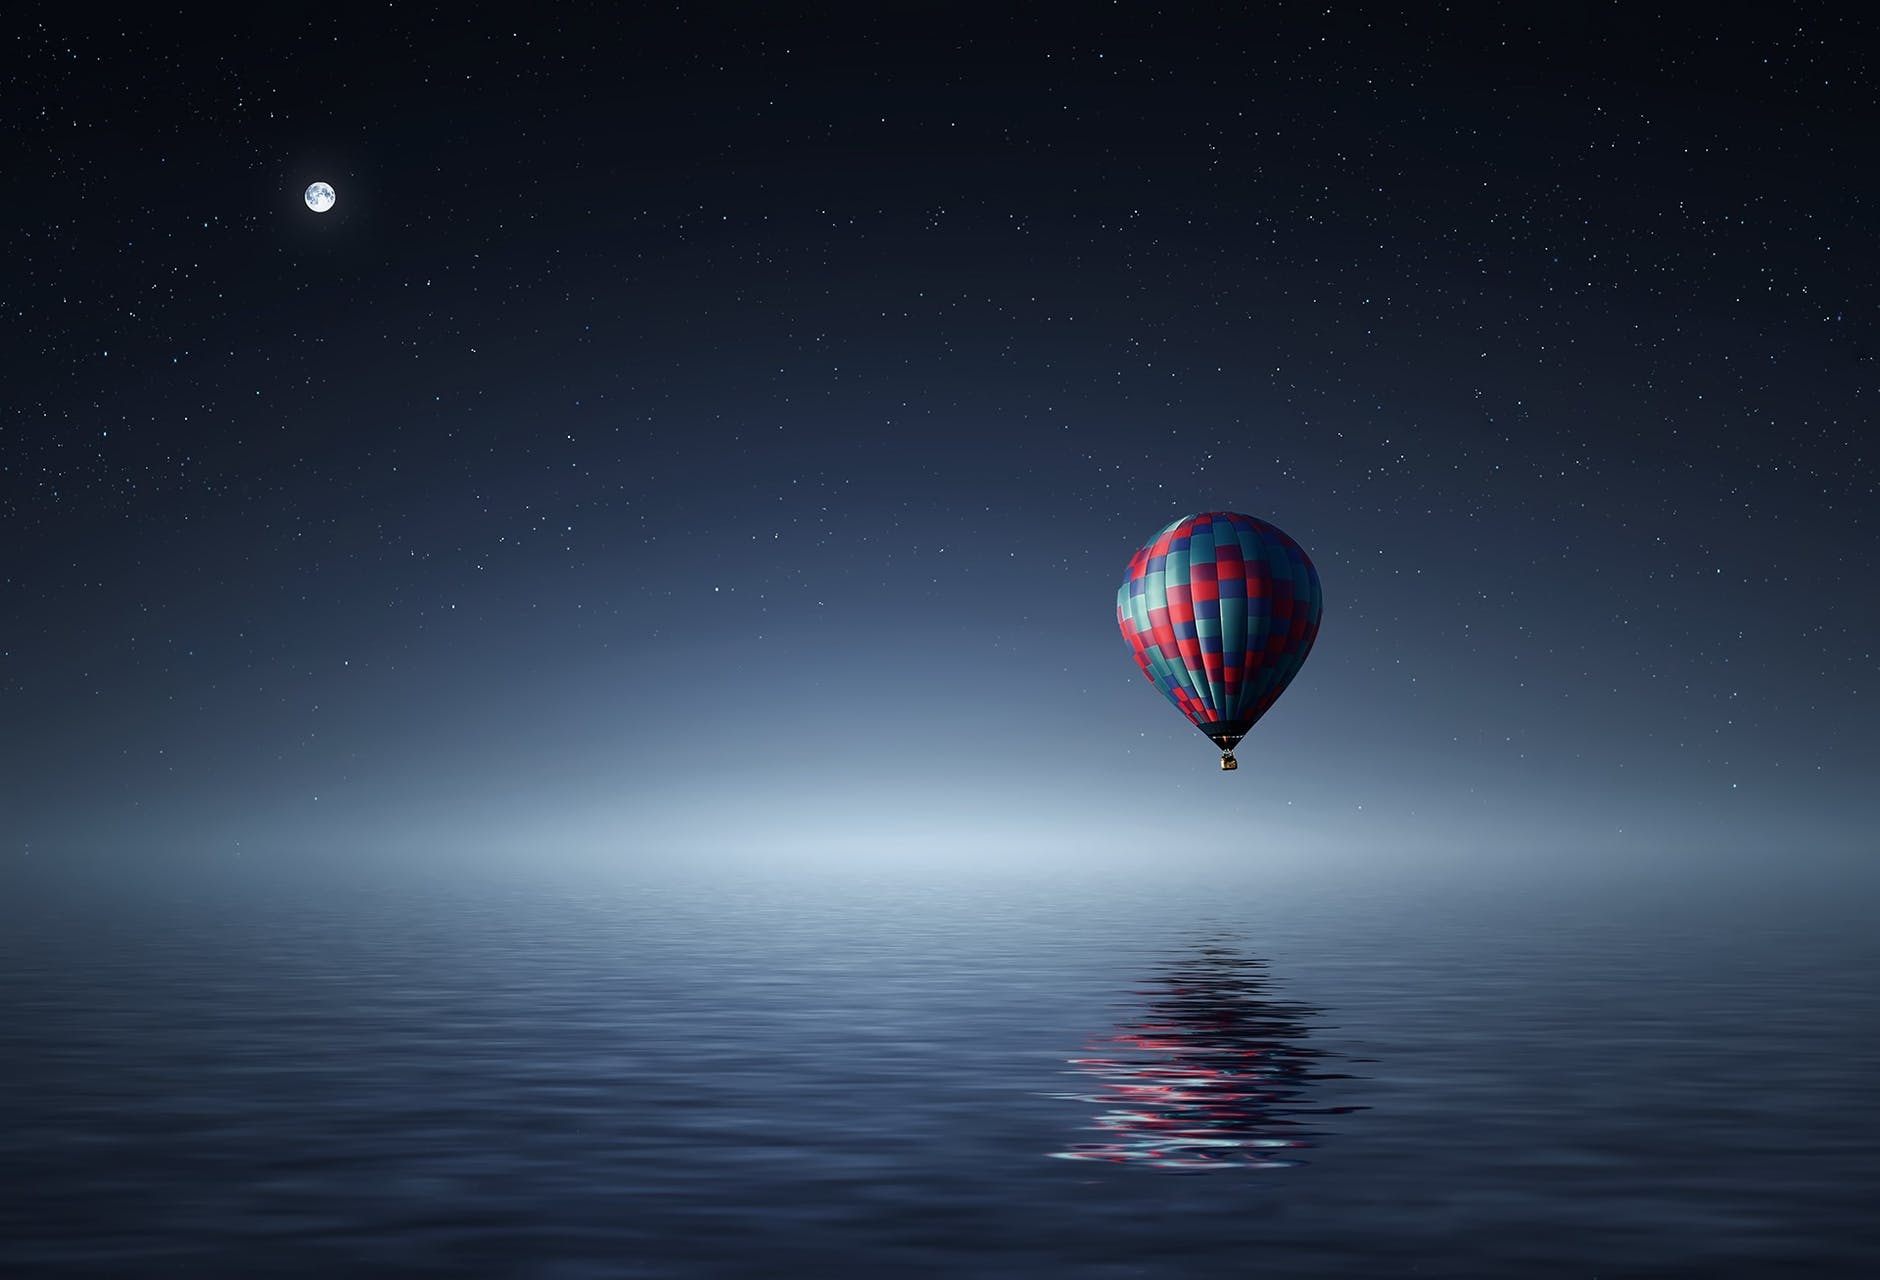 red and blue hot air balloon floating on air on body of water during night time